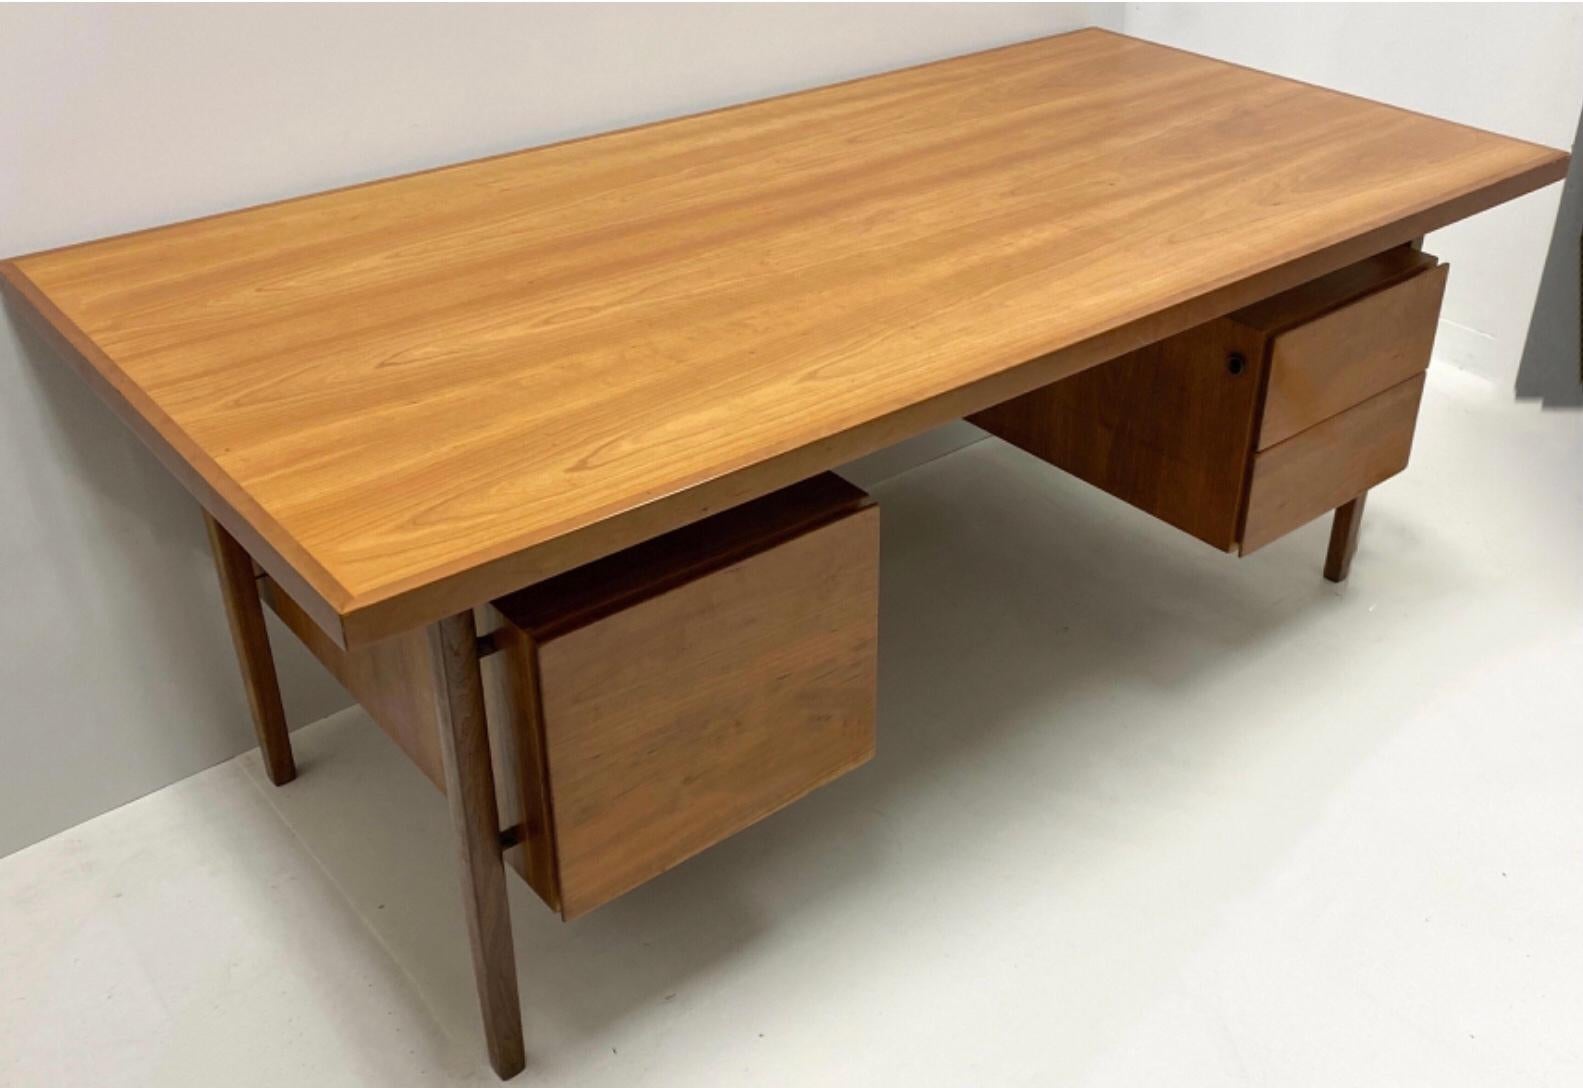 This a large, modern floating top desk designed by Raymond Loewy for Mengel. It is in very good condition and is a pretty,sleek maple. The work surface is excellent ! Knee clearance is 27”.